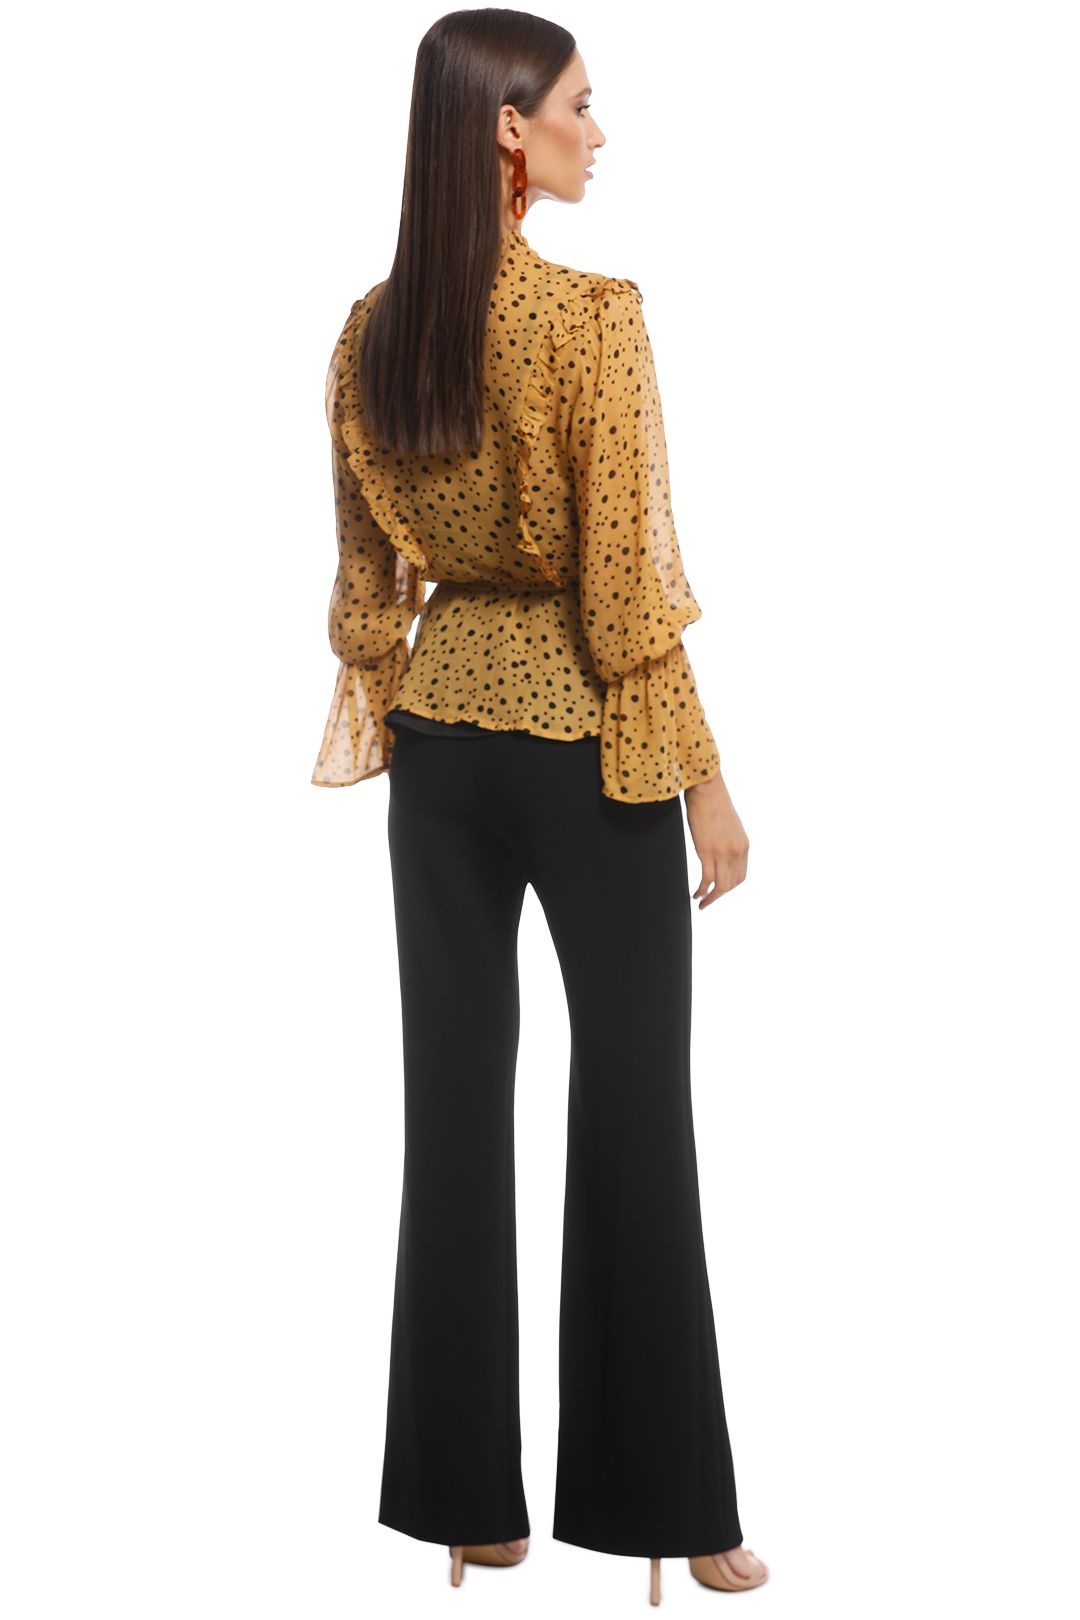 Ministry of Style - Songbird Top - Yellow Polkadot - Back